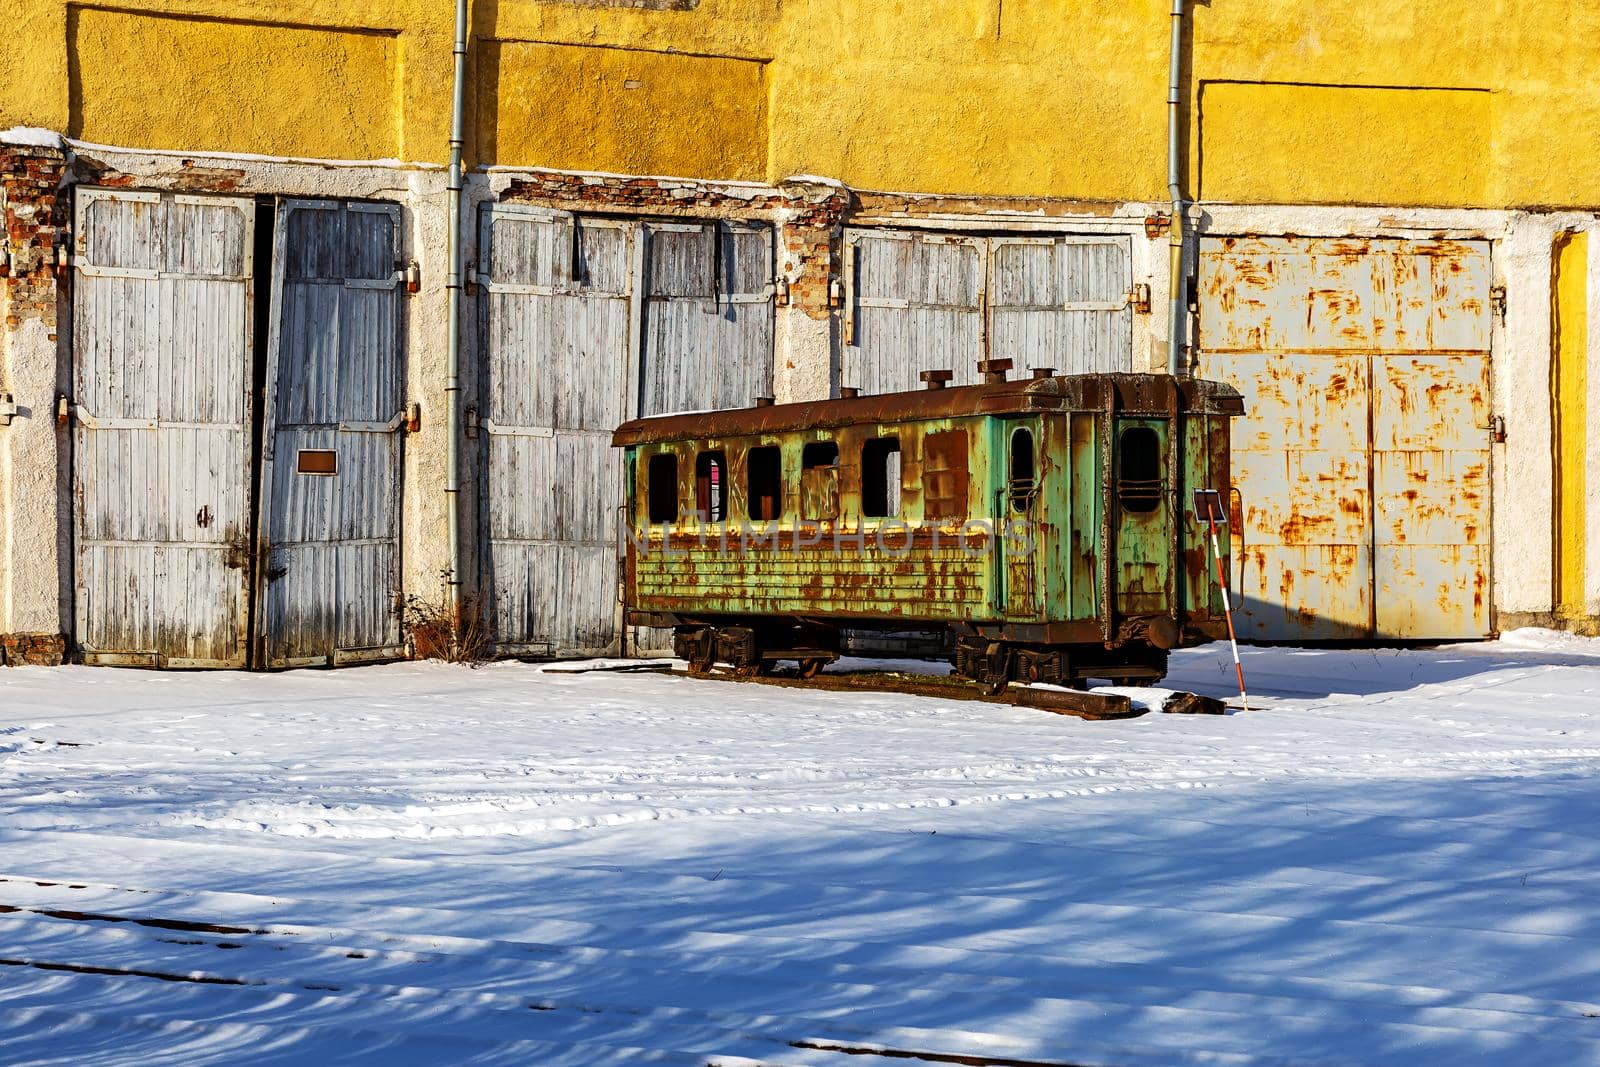 Old railway carriage in a depot on the background of a building with a gate. Latvia